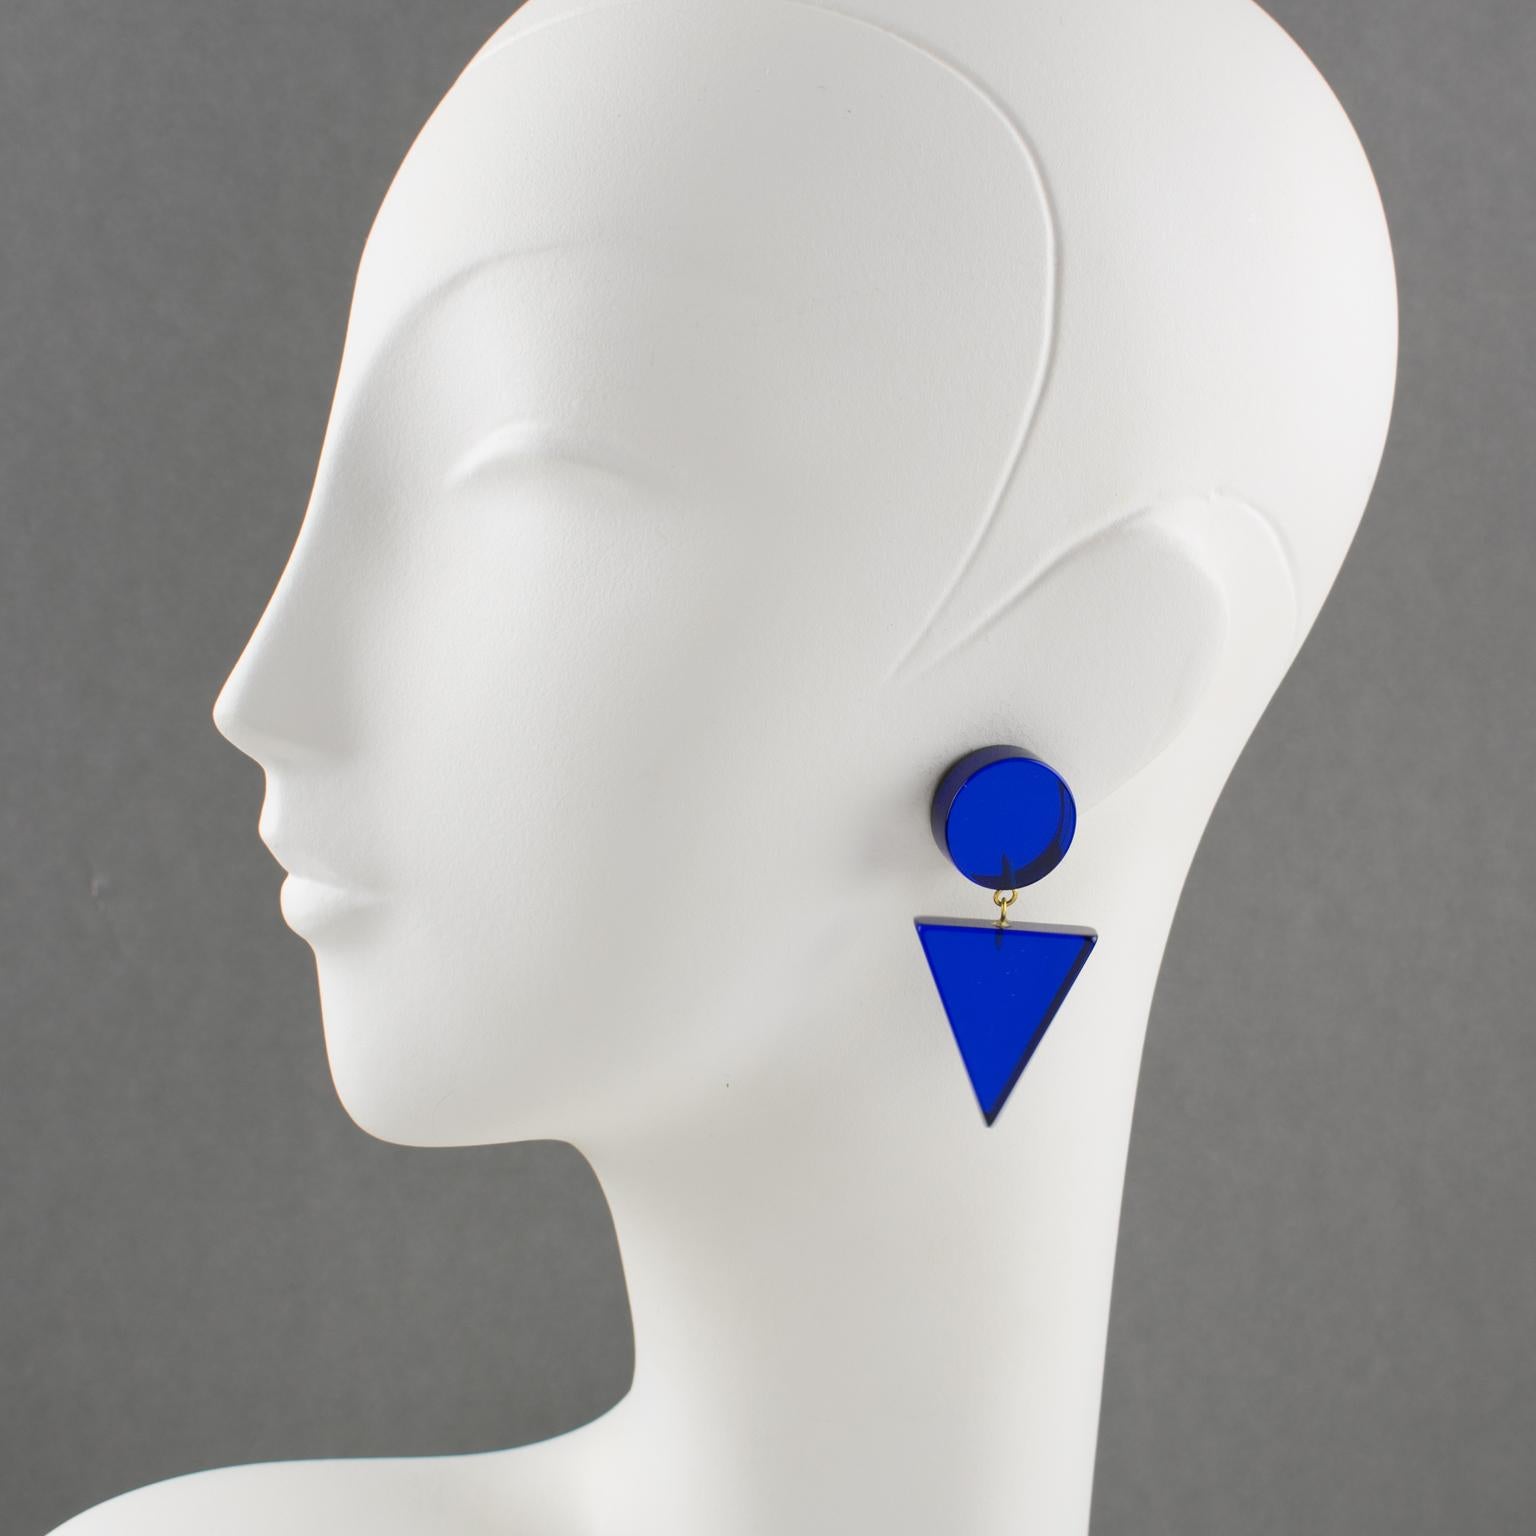 Lovely dangling Lucite clip-on earrings. Geometric chandelier shape with carving. Gorgeous intense royal blue color. No visible marking.
Measurements:  1 in. wide (2.5 cm) x 2.19 in. high (5.5 cm)